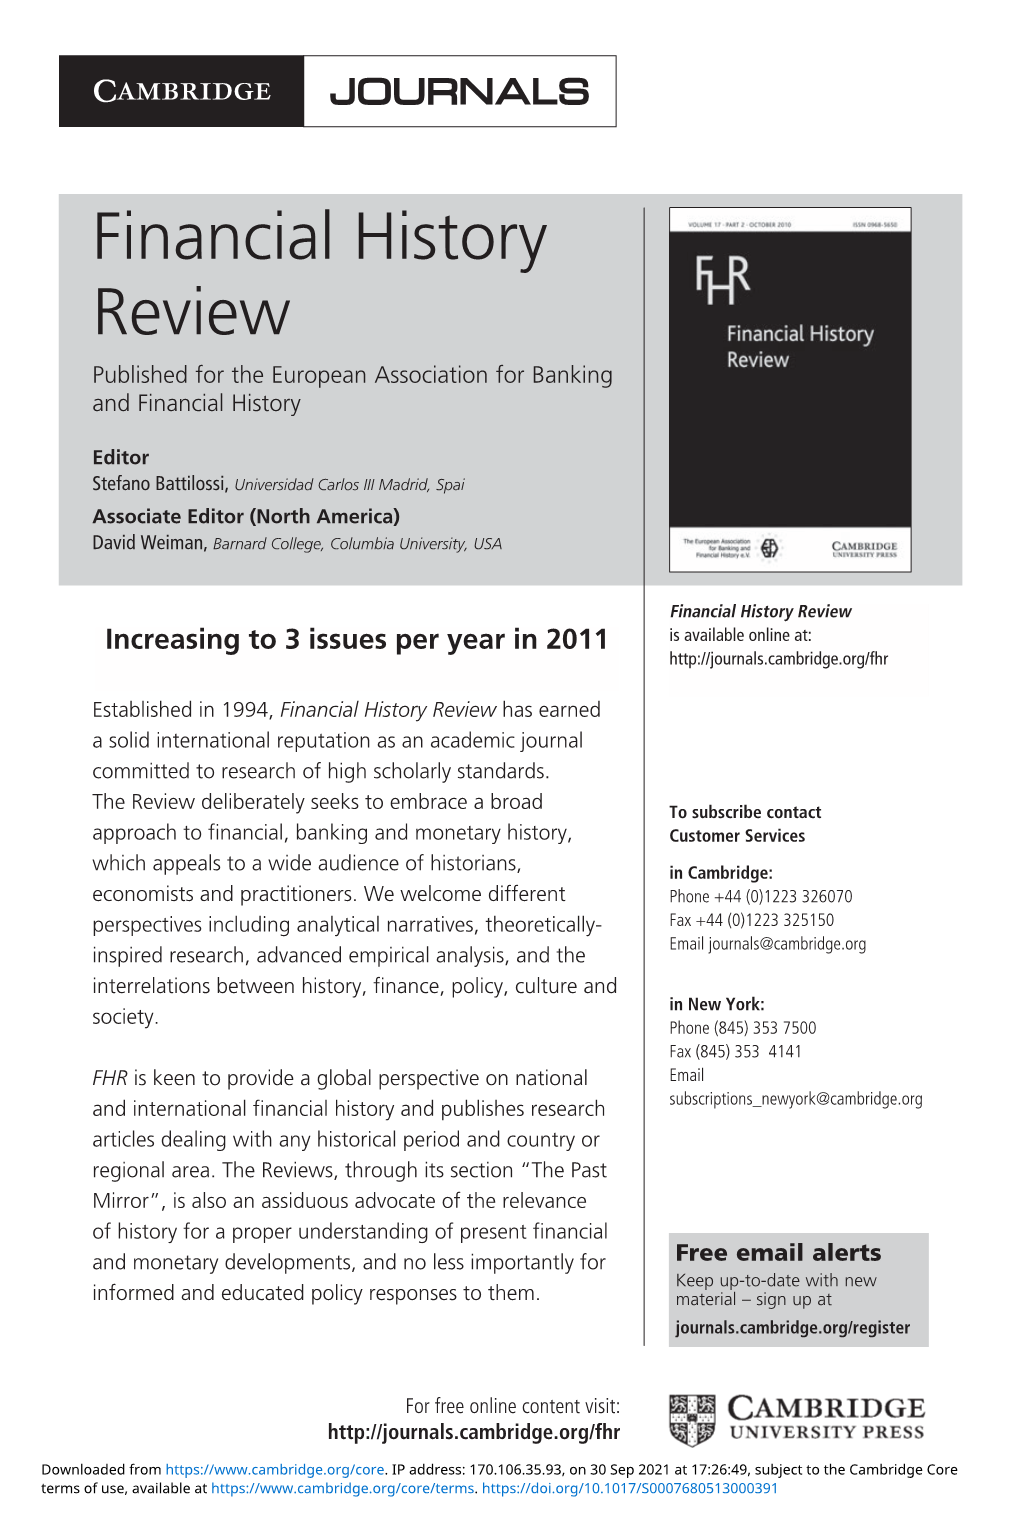 Financial History Review Published for the European Association for Banking and Financial History